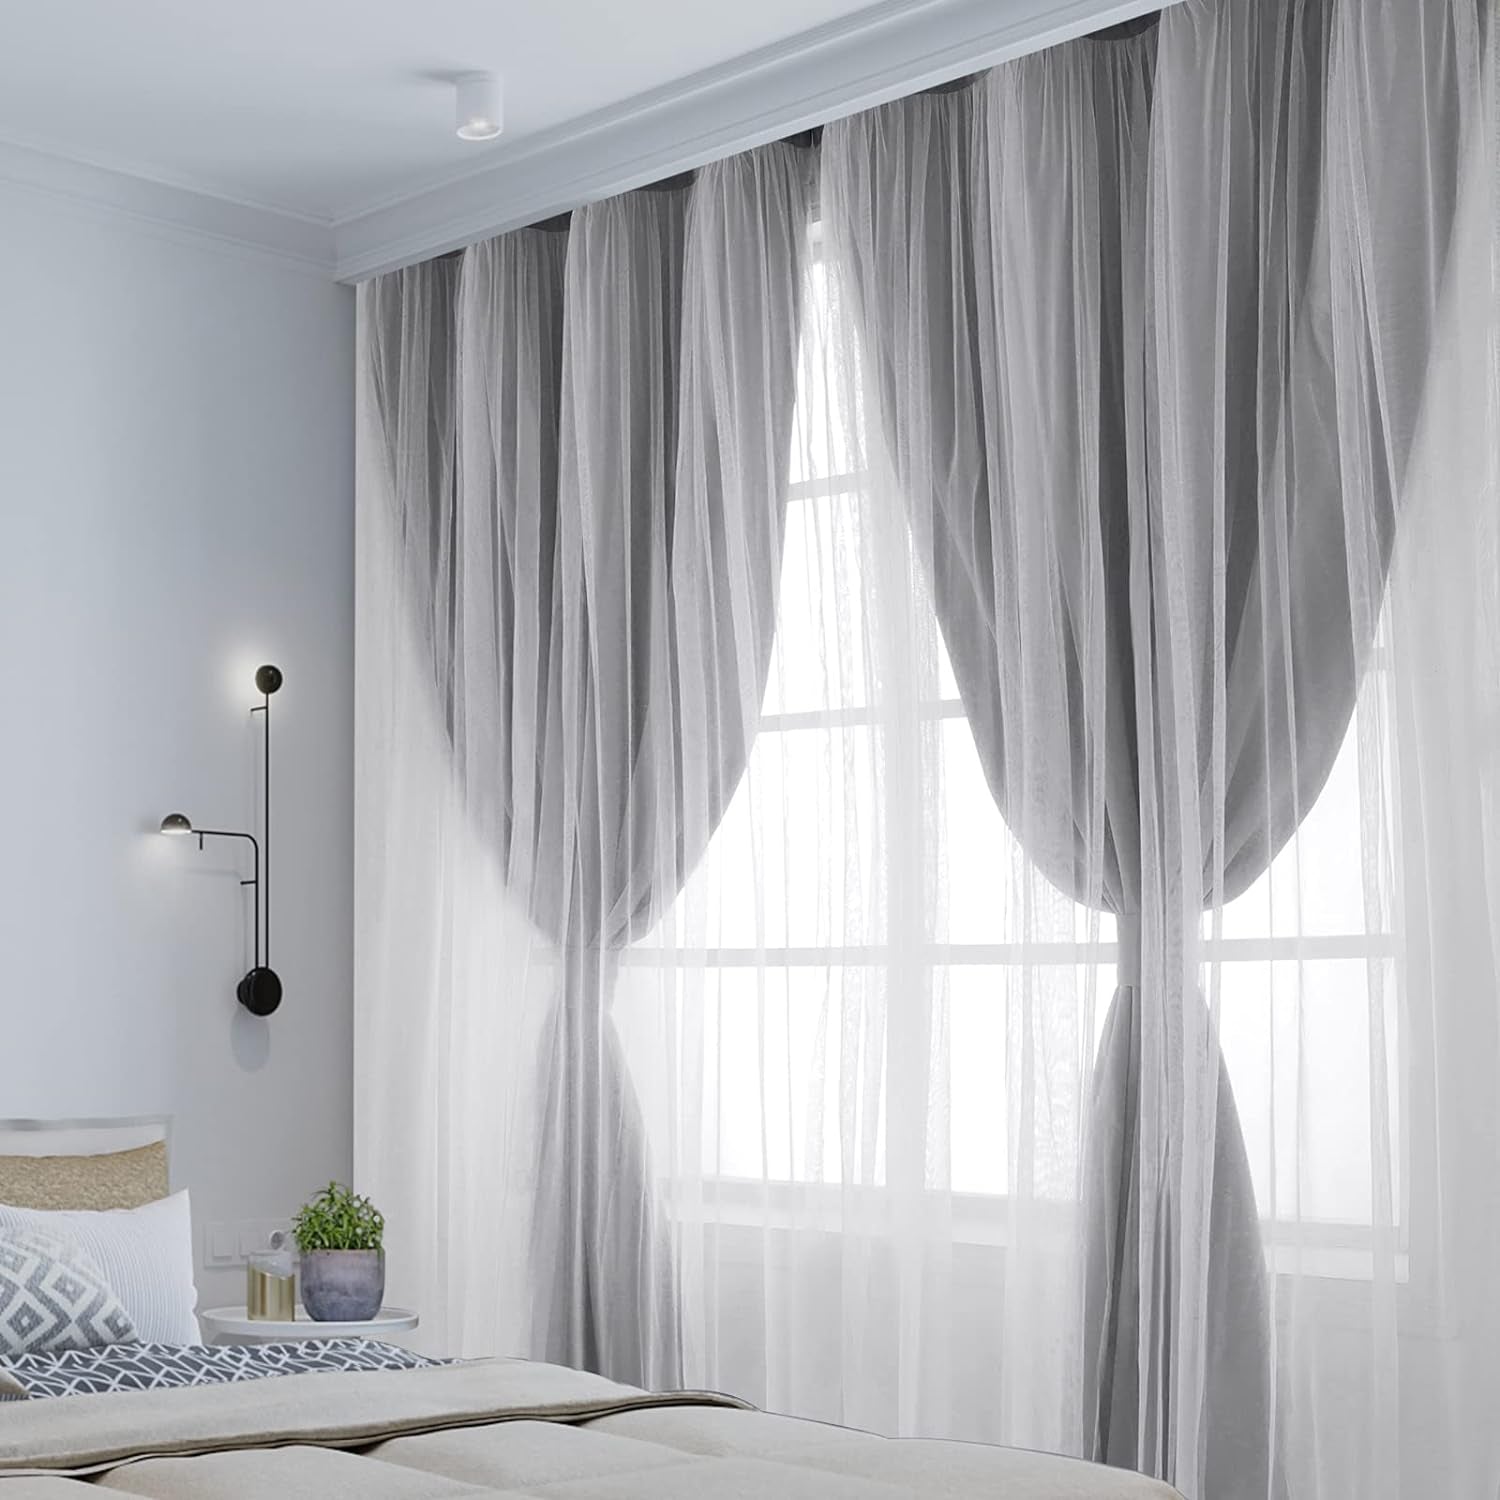 HOMEIDEAS Double Layer Curtains Light Grey Blackout Curtains 84 Inch Length 2 Panels Nursery Curtains for Girls Kids Bedroom Grommet Blackout Curtains with Sheer Overlay  HOMEIDEAS   